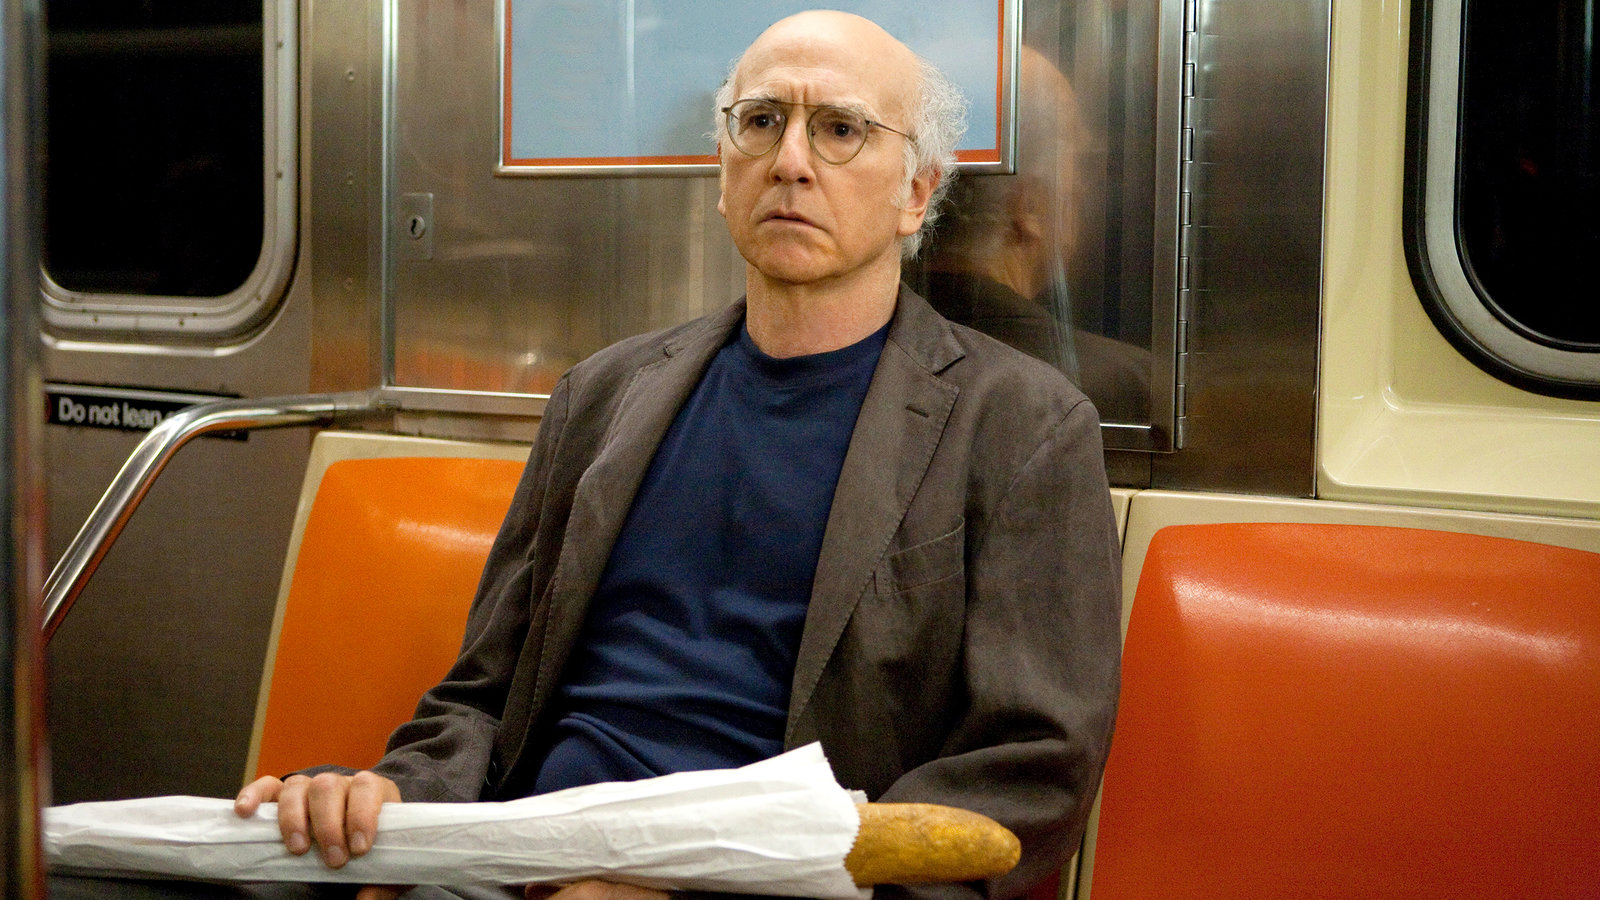 FLOOD - Larry David's Most Memorable “Curb Your Enthusiasm” Fits